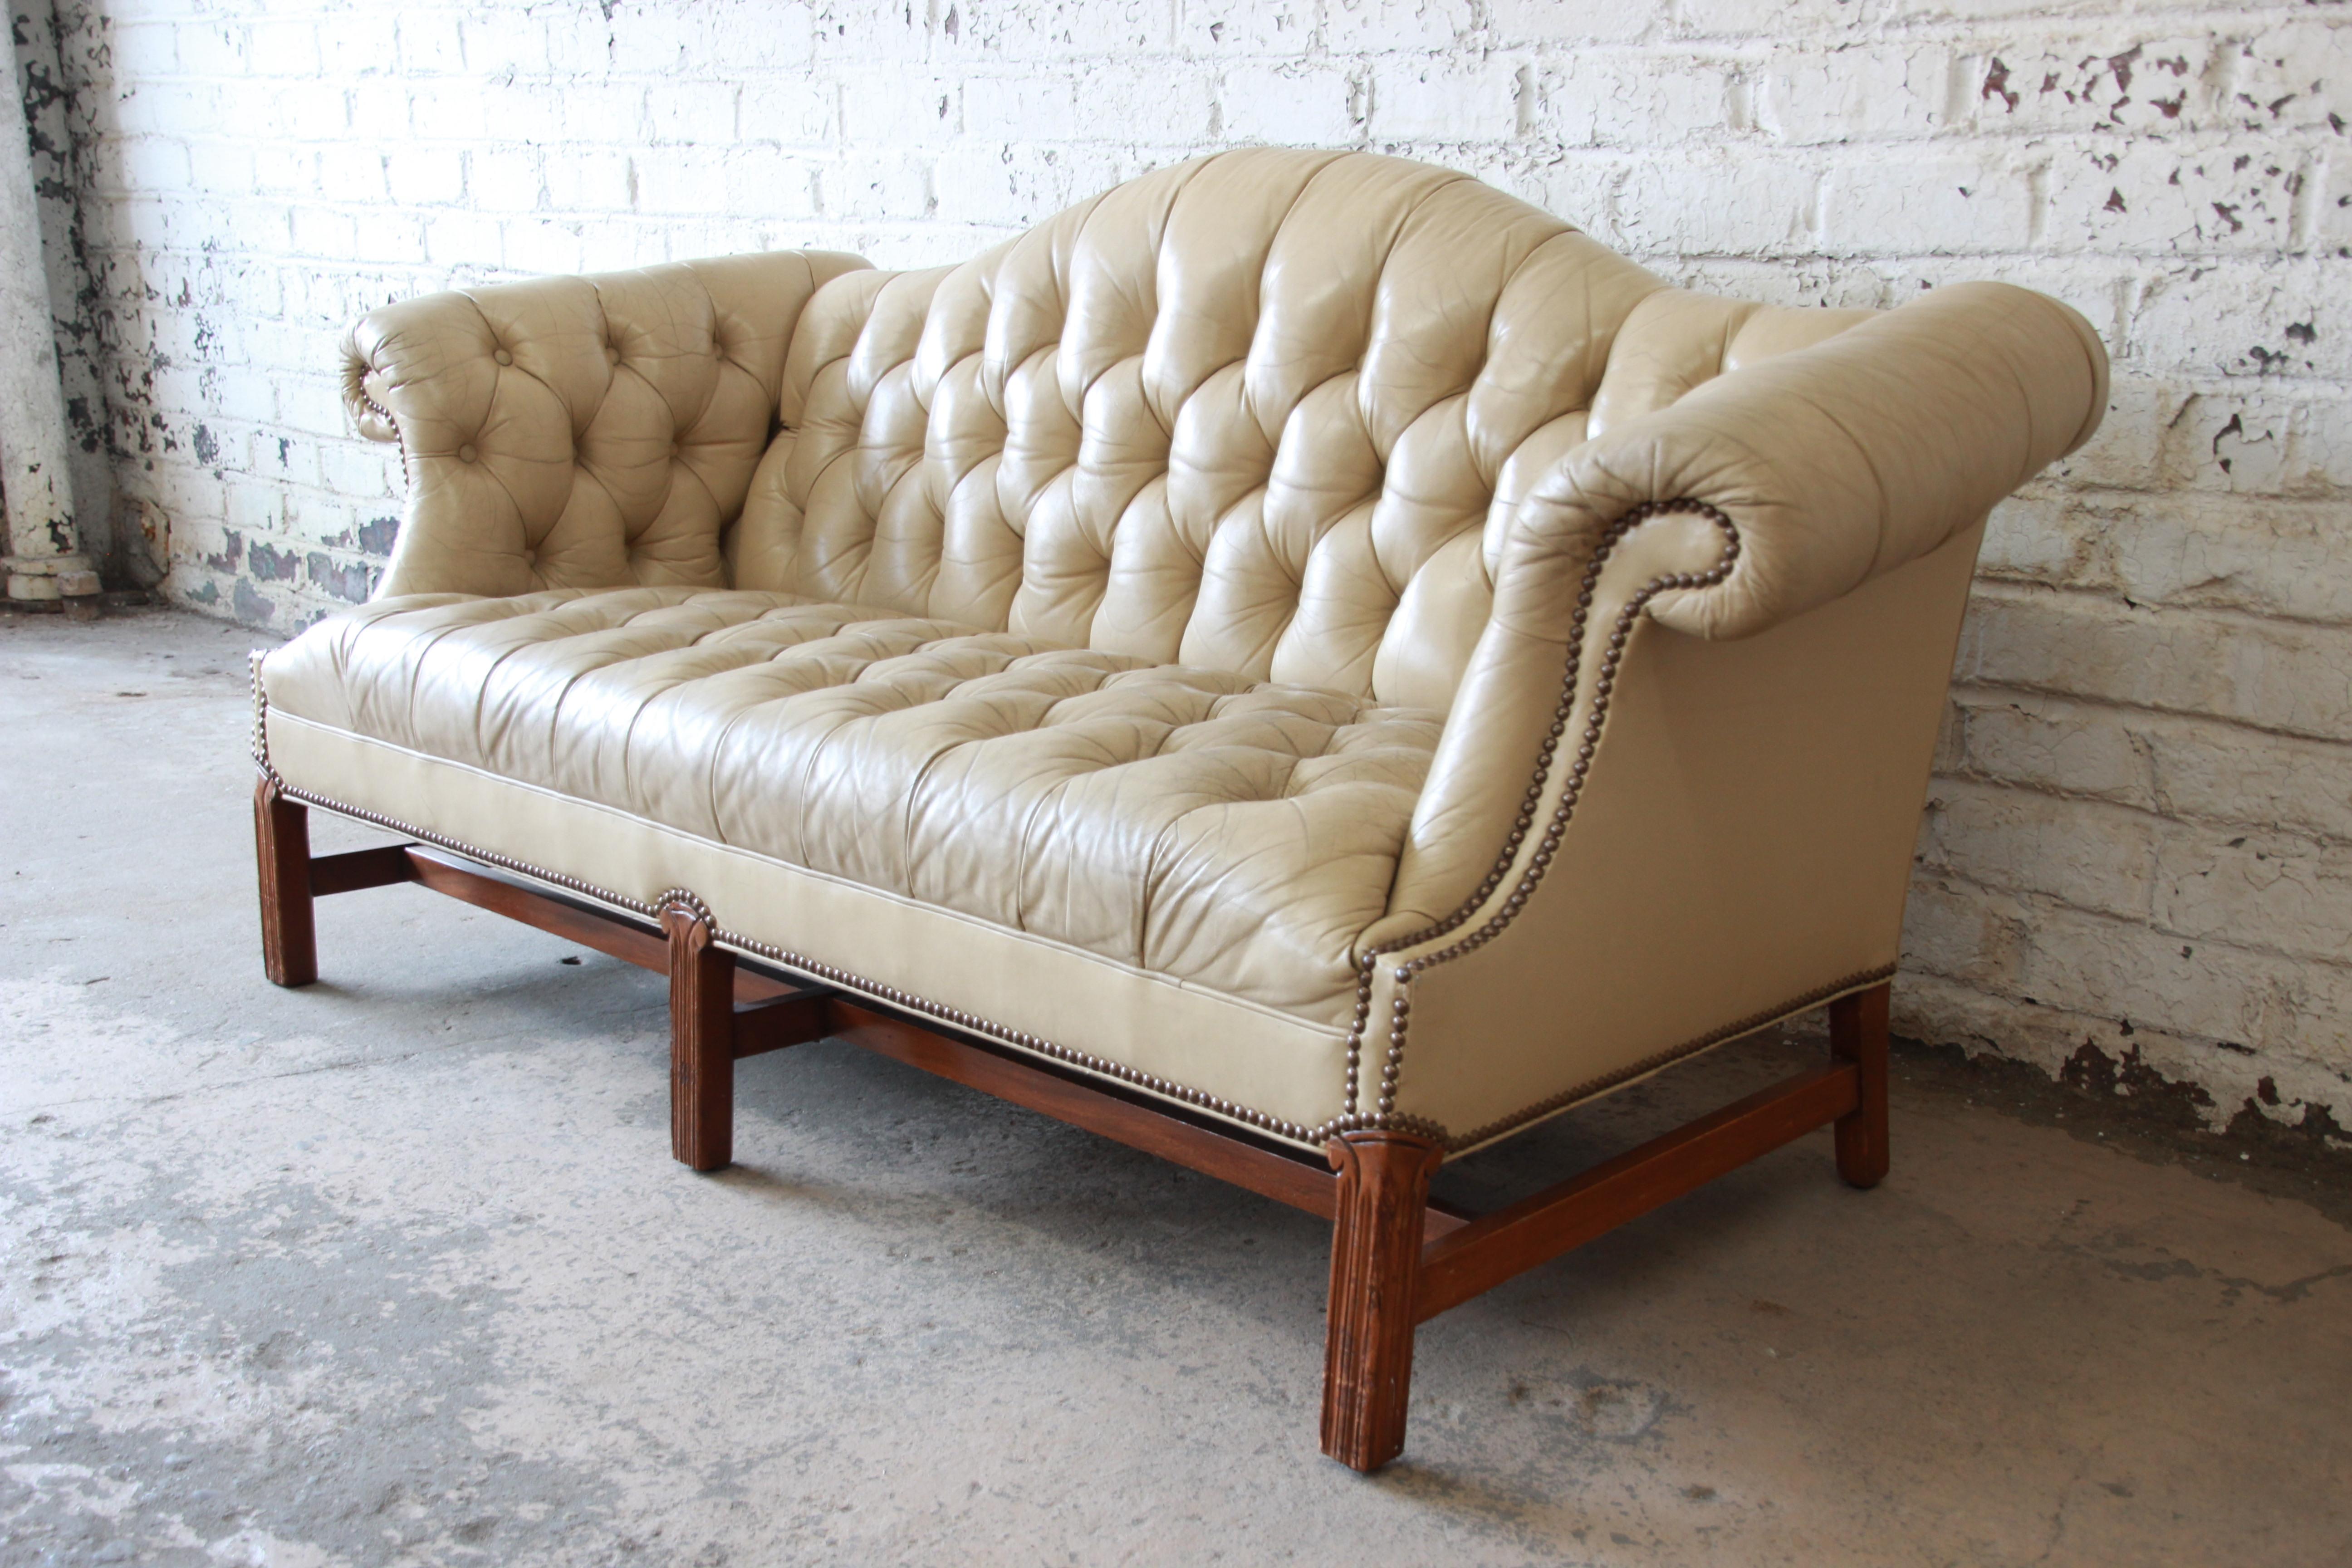 An exceptional vintage tufted tan leather Chesterfield style sofa. The sofa features beautifully aged and distressed tan leather, brass nailhead trim, and scrolled arms. It sits on solid carved walnut legs, with walnut stretchers. Seat height is